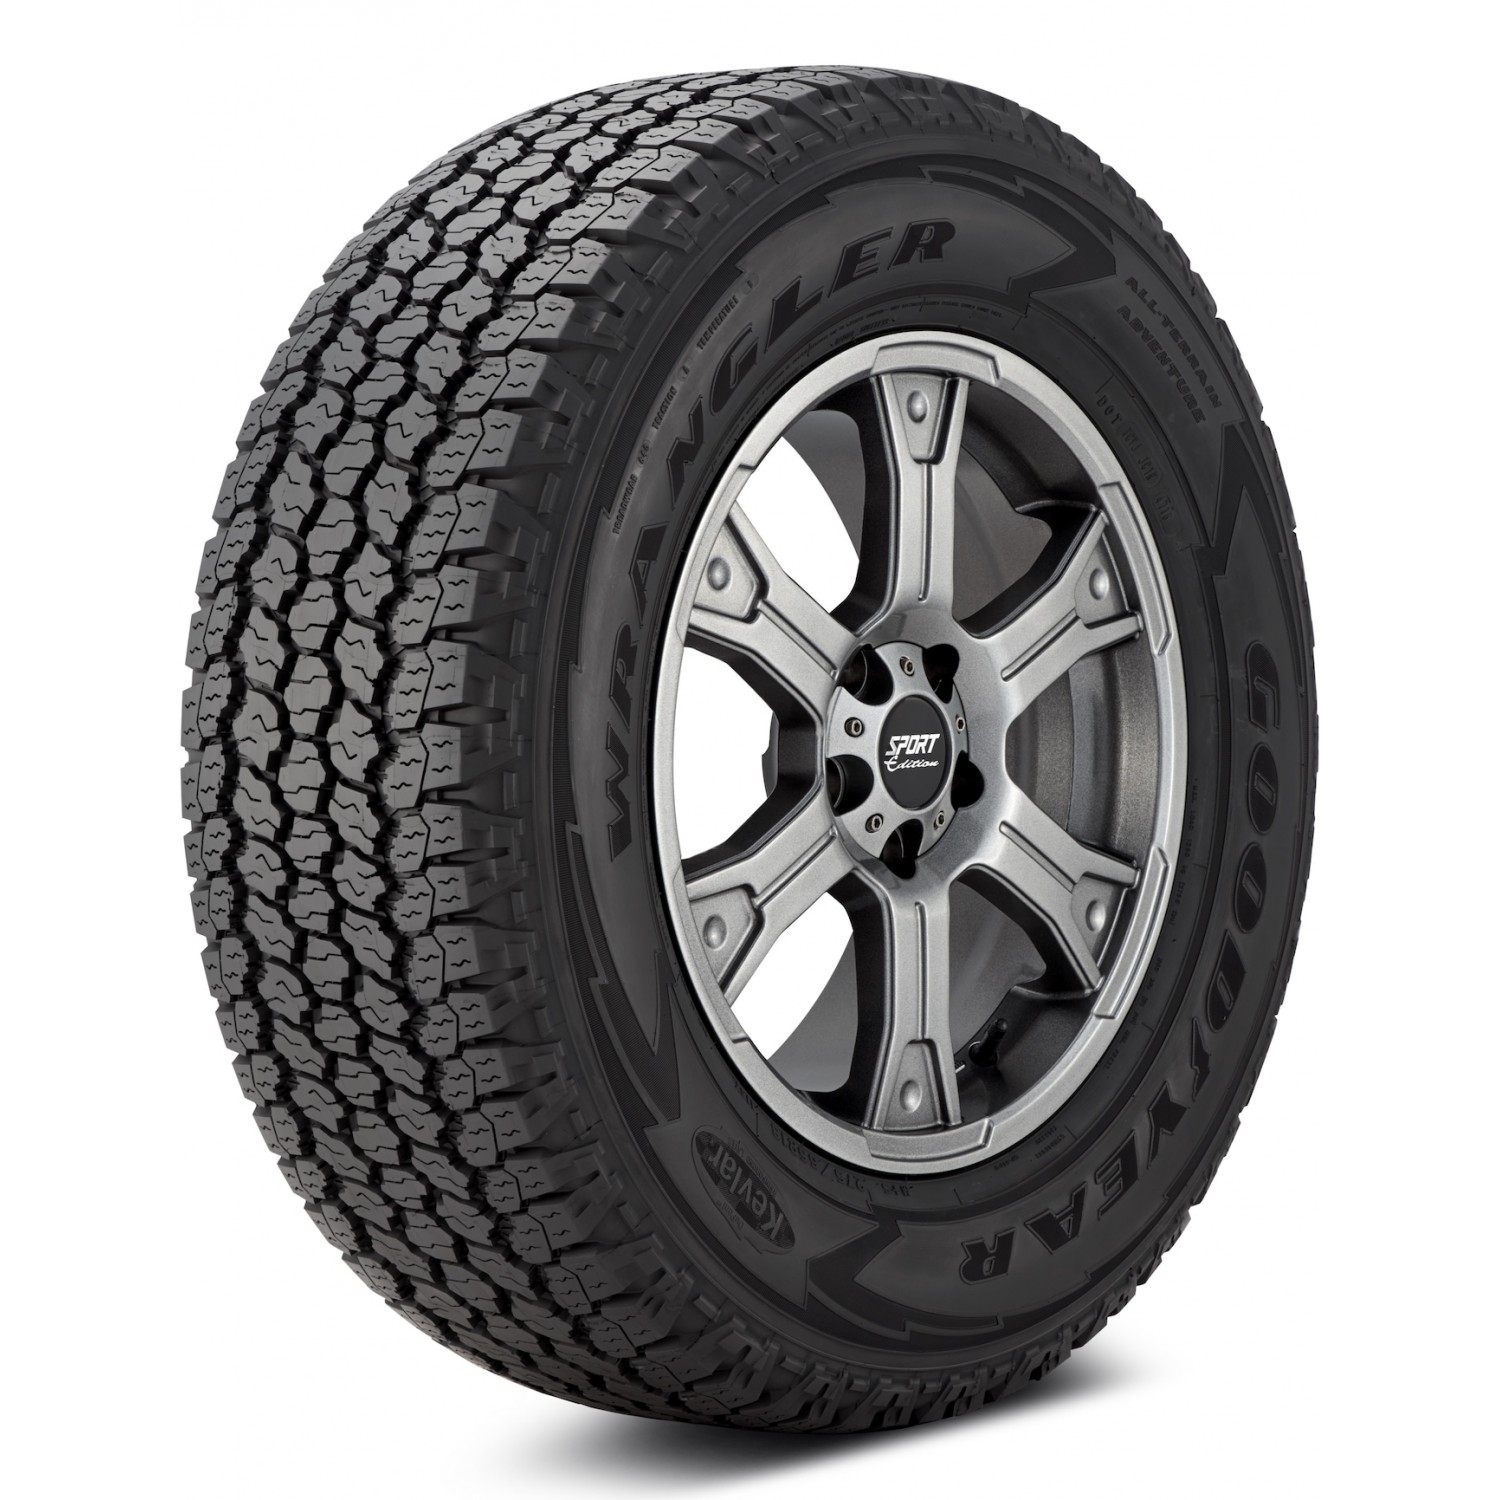 Goodyear Wrangler AT Adventure With Kevlar Black Sidewall Tire (275/60R20  115T) vzn121221